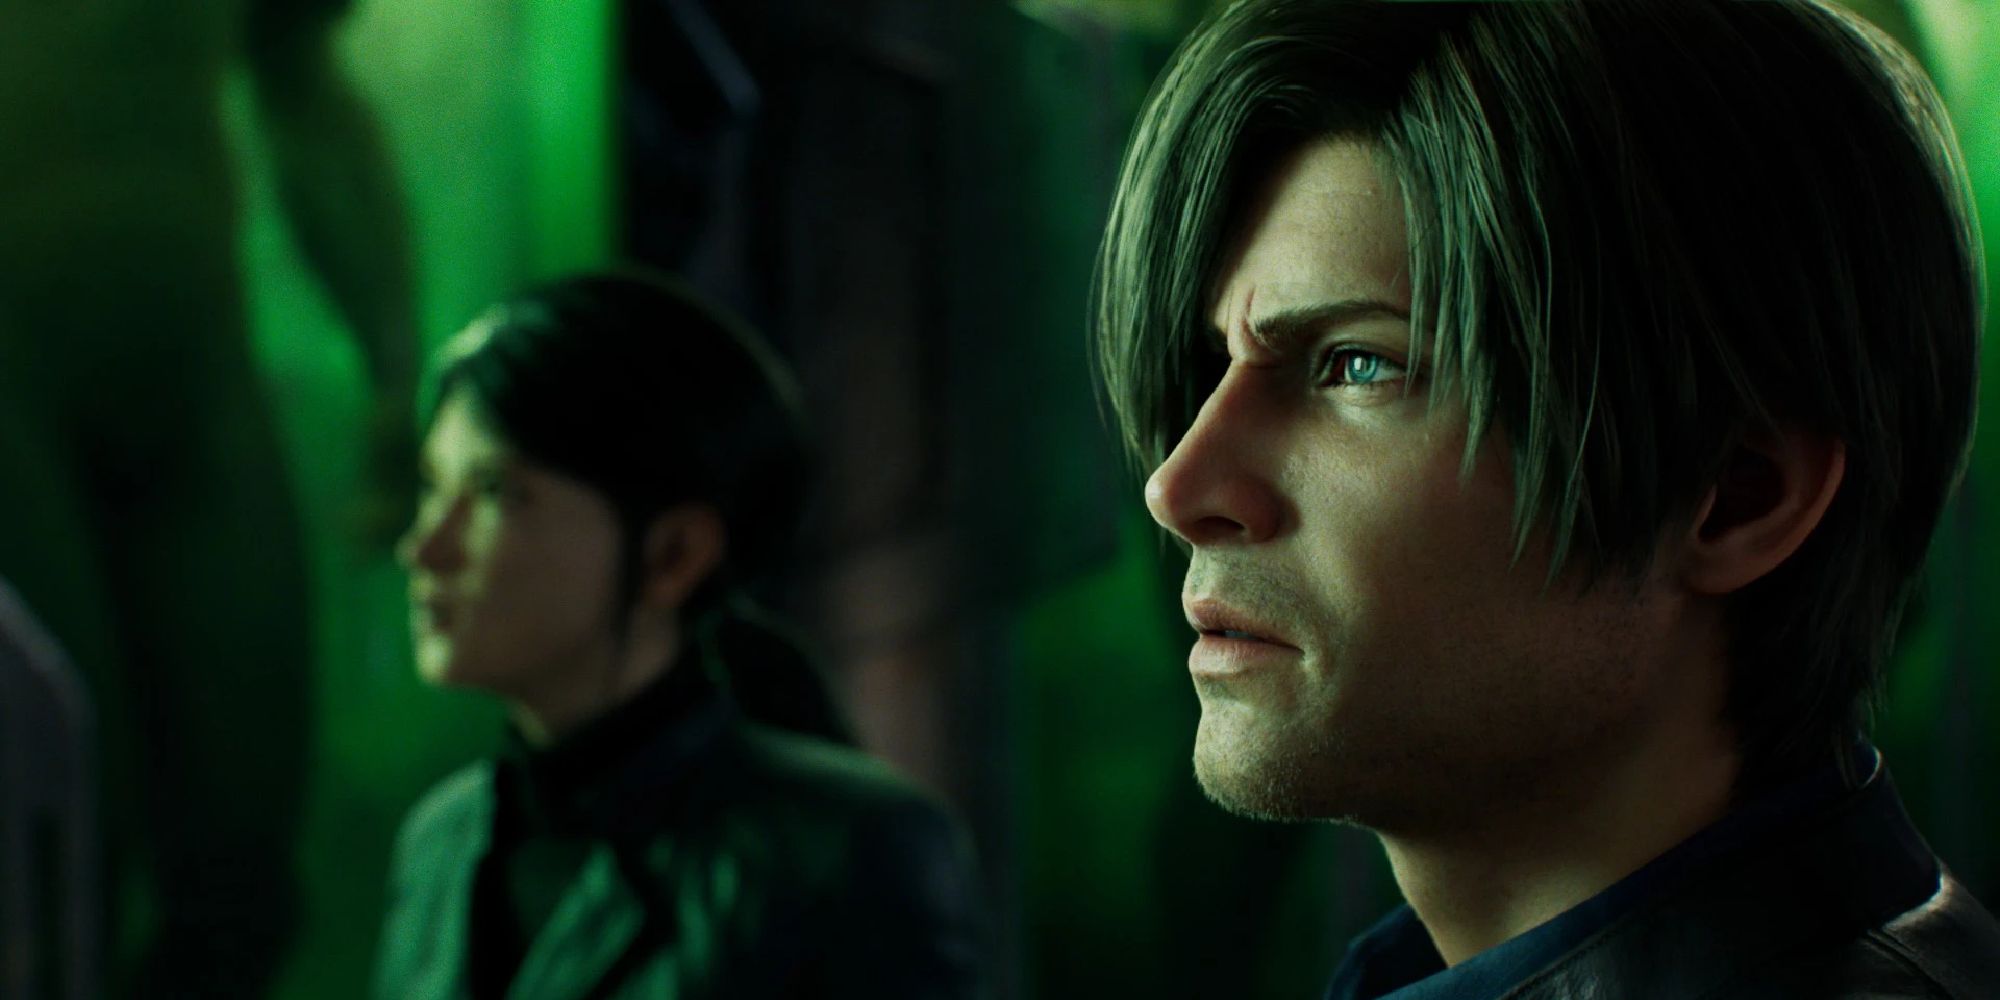 Leon faces to the left with a look of concern, the scene bathed in emerald green light. 